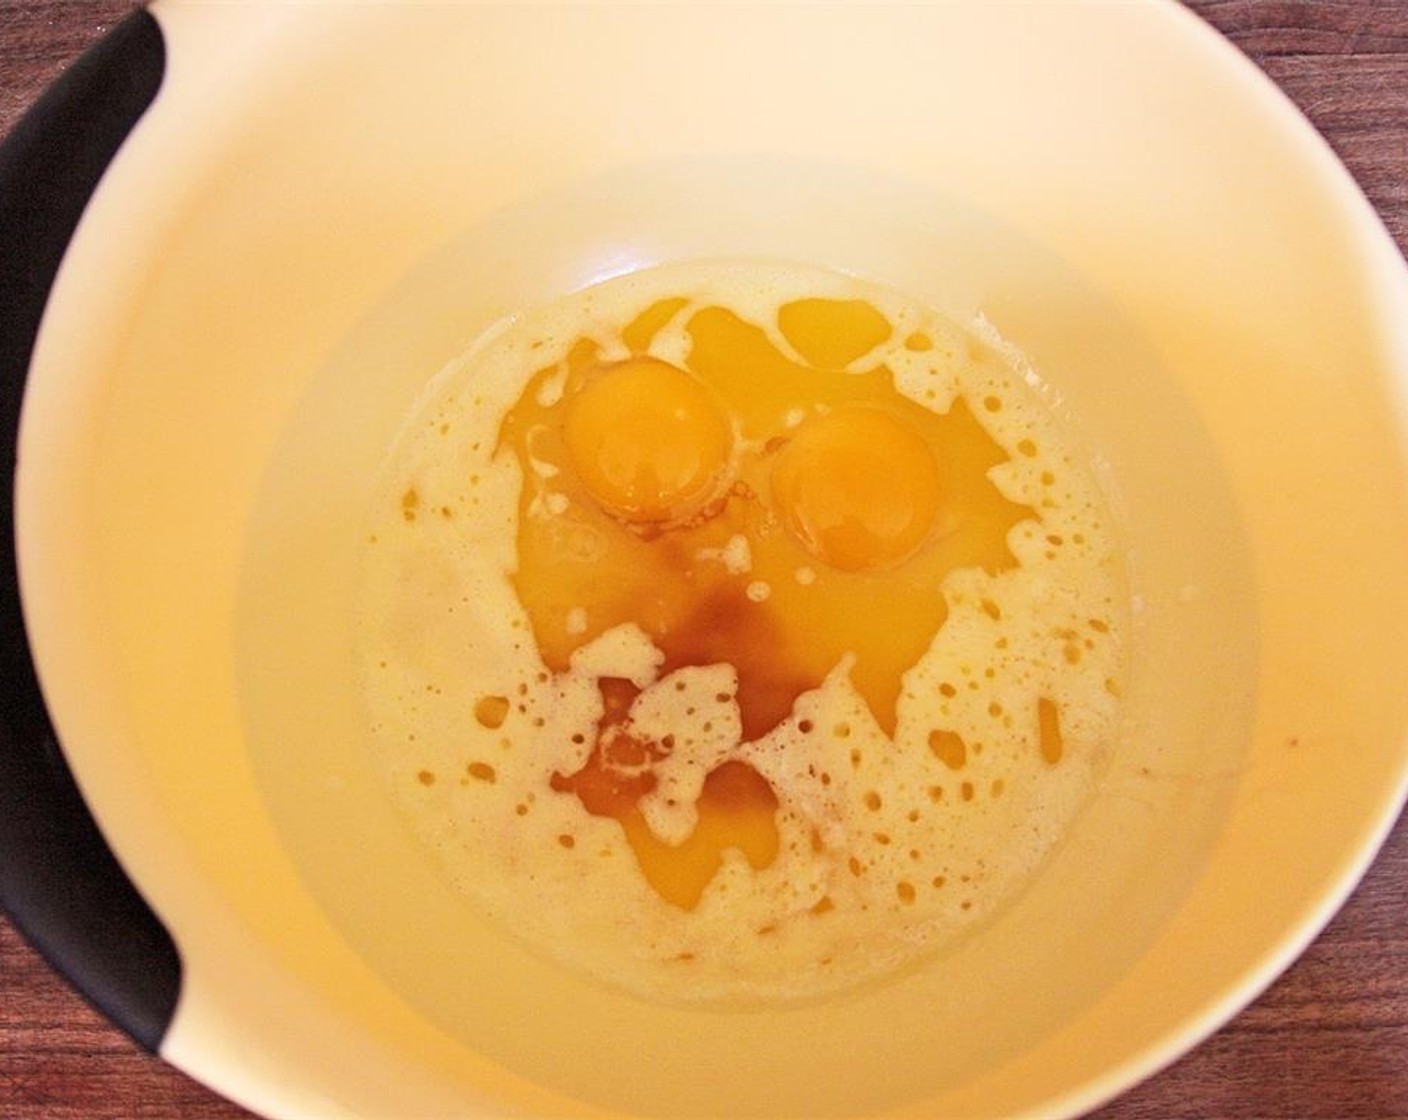 step 5 In a separate bowl, combine Eggs (2), Butter (1 cup), Grapeseed Oil (1/2 cup), and Vanilla Extract (1 1/4 tsp).